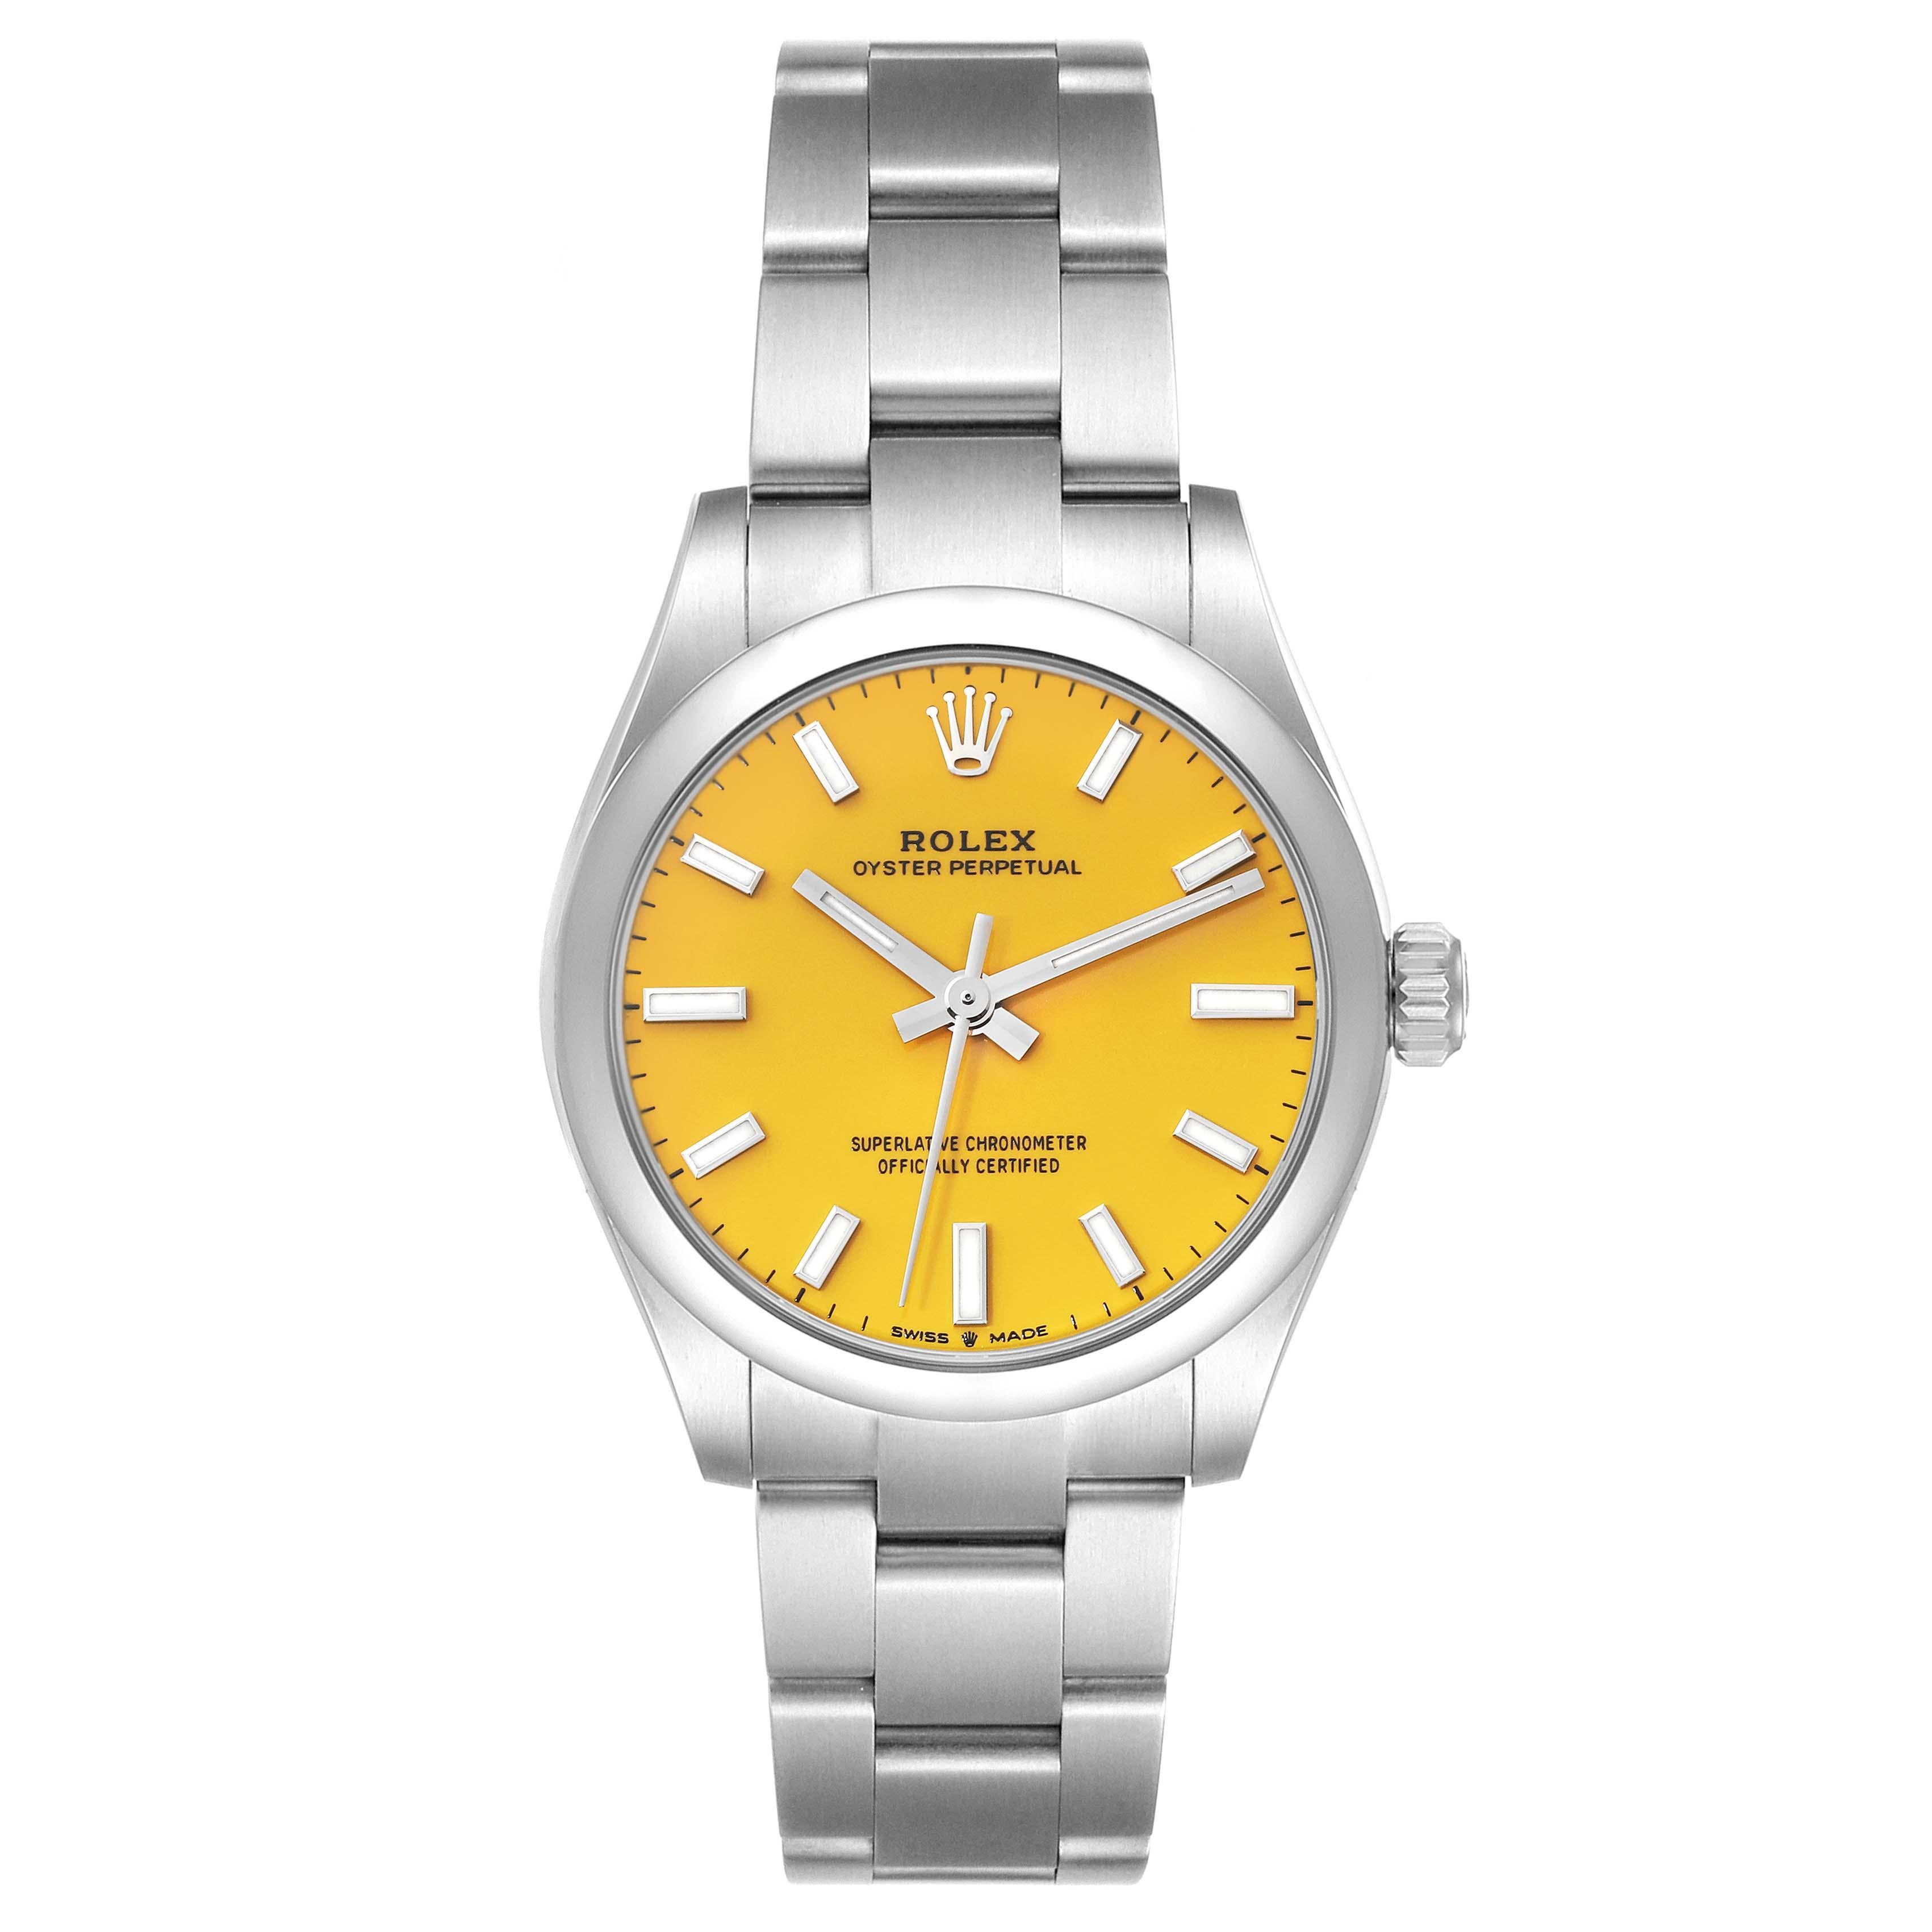 Rolex Oyster Perpetual Midsize Yellow Dial Steel Ladies Watch 277200 Box Card. Automatic self-winding movement. Stainless steel oyster case 31.0 mm in diameter. Rolex logo on a crown. Stainless steel smooth bezel. Scratch resistant sapphire crystal.